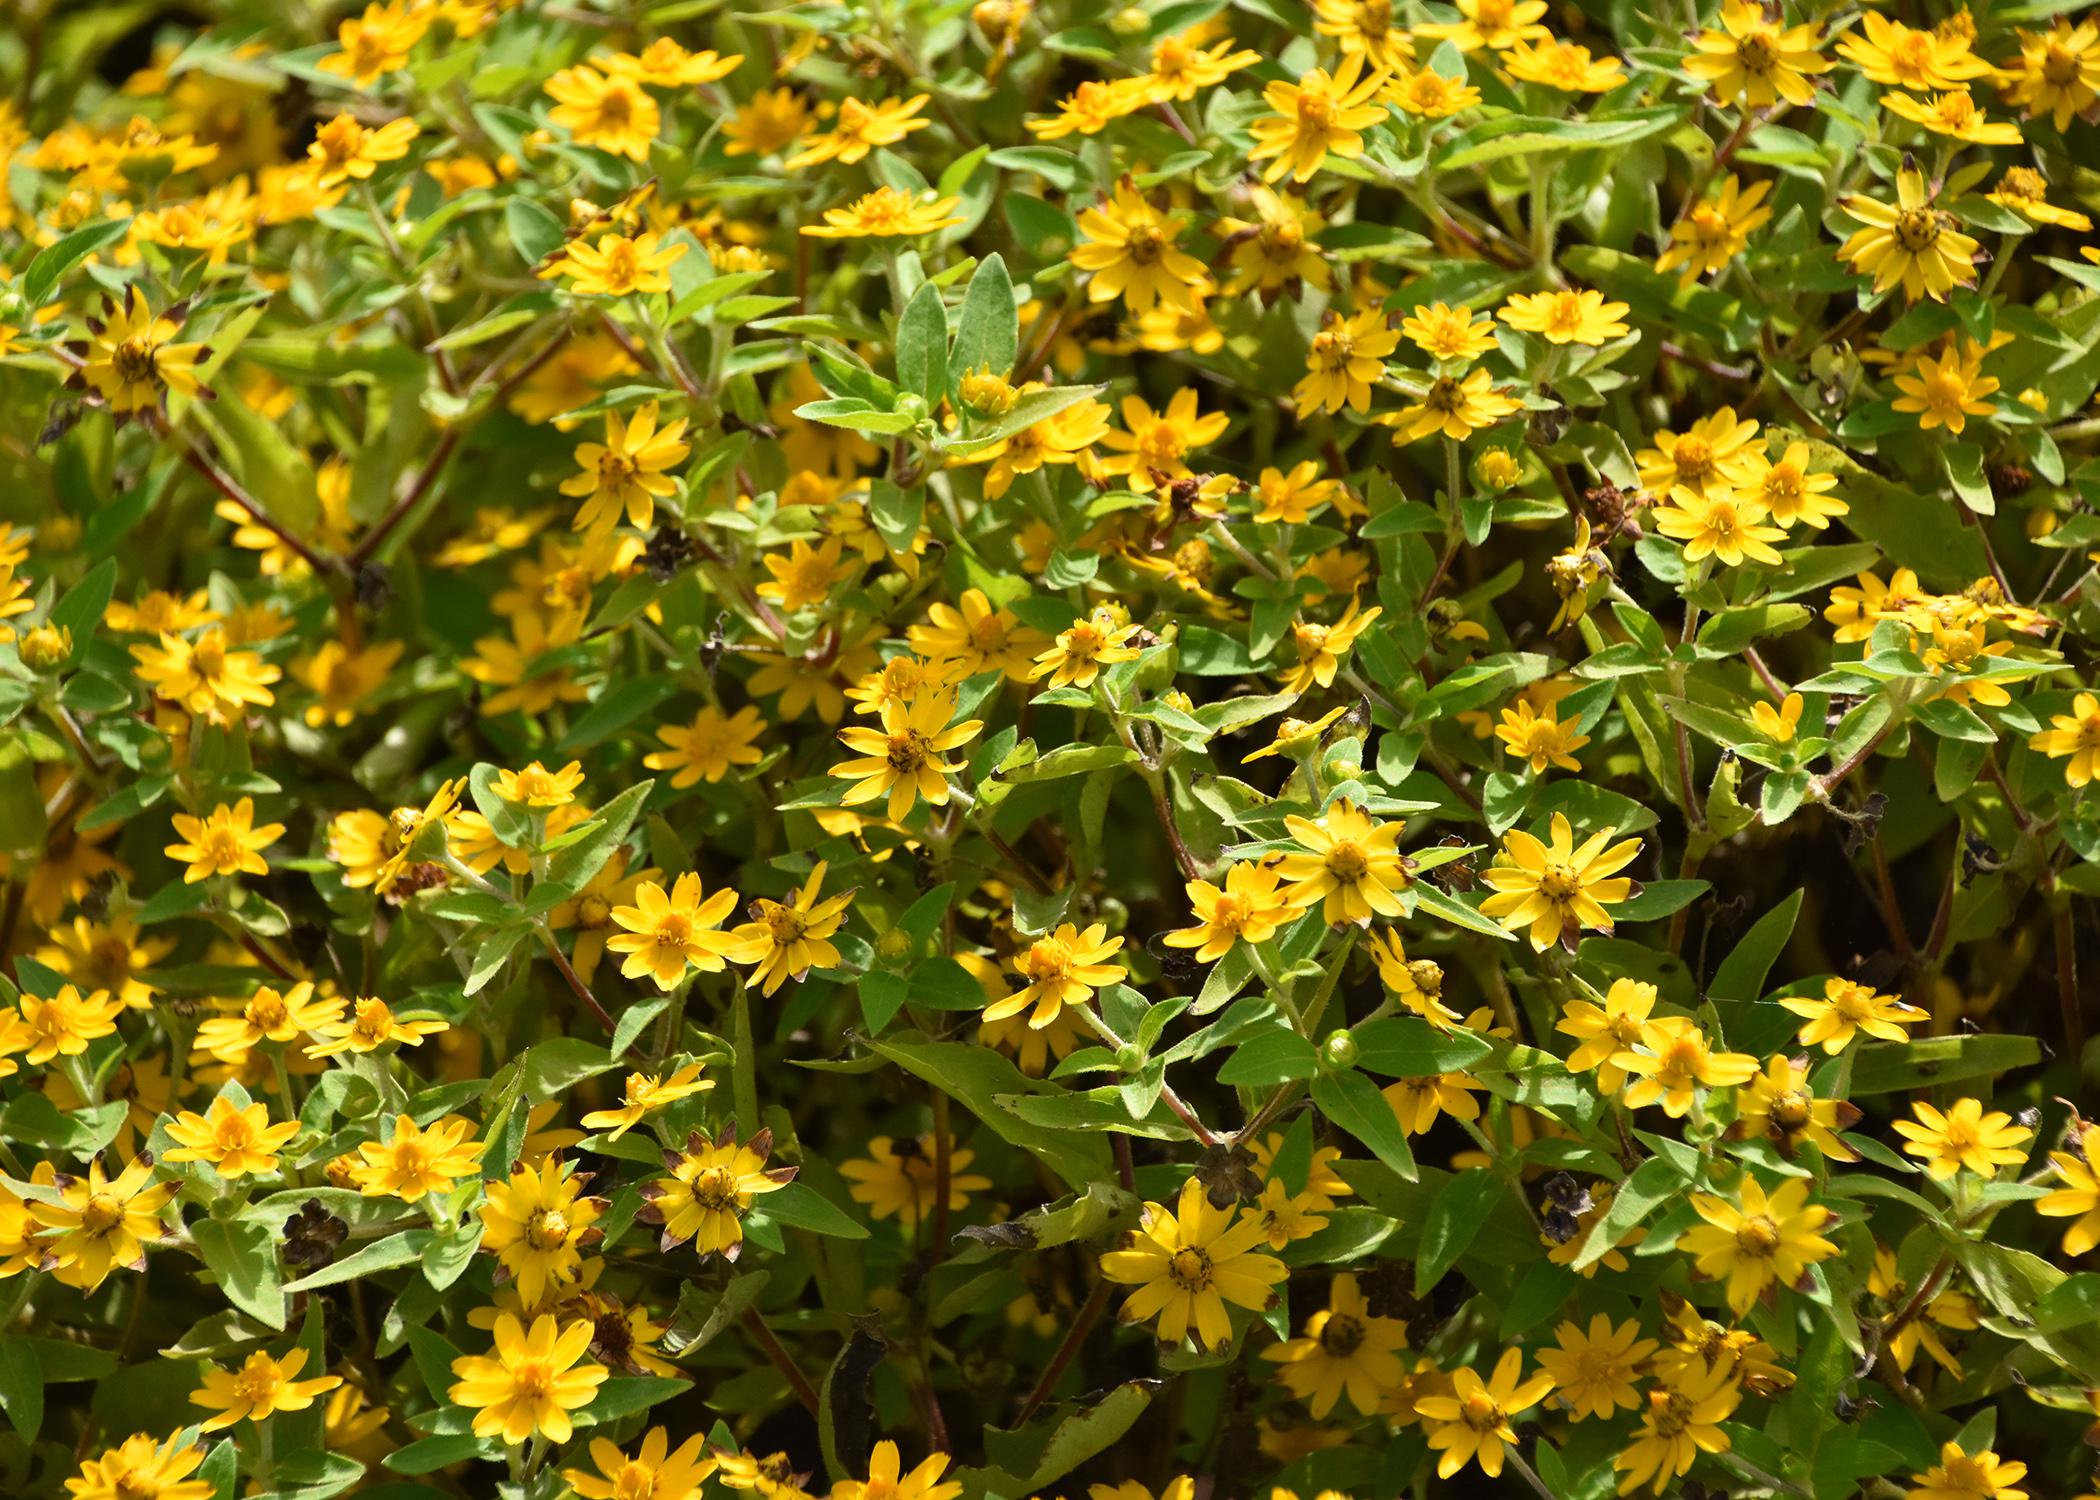 A green bush is covered in scores of yellow blooms.